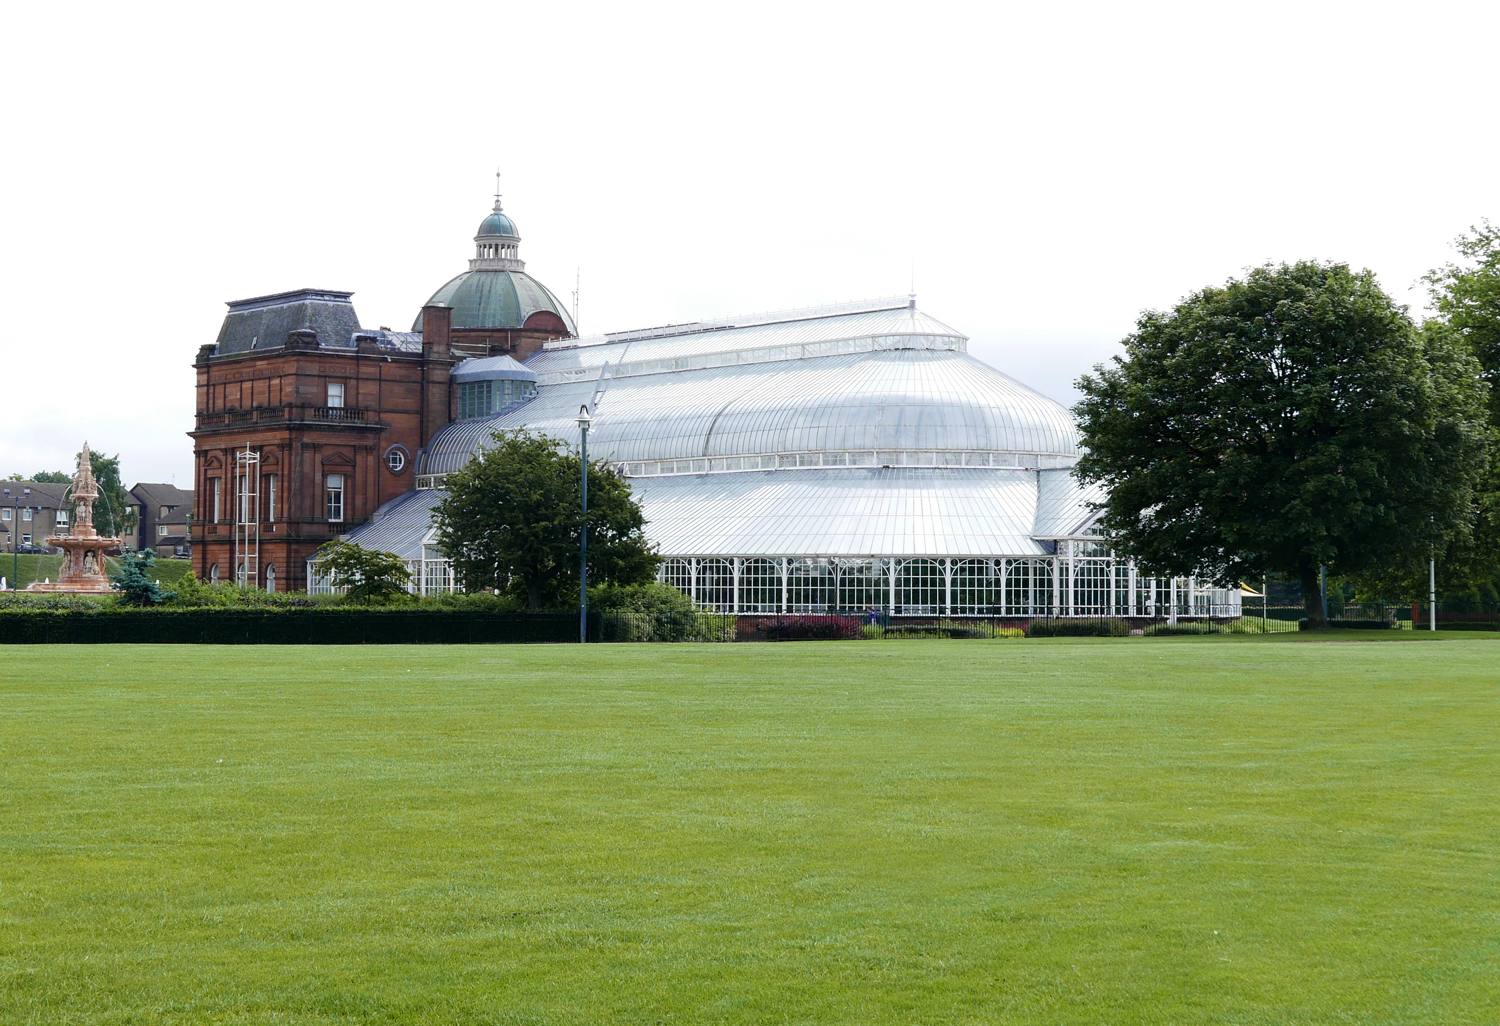 The People's Palace and Winter Garden, Glasgow green